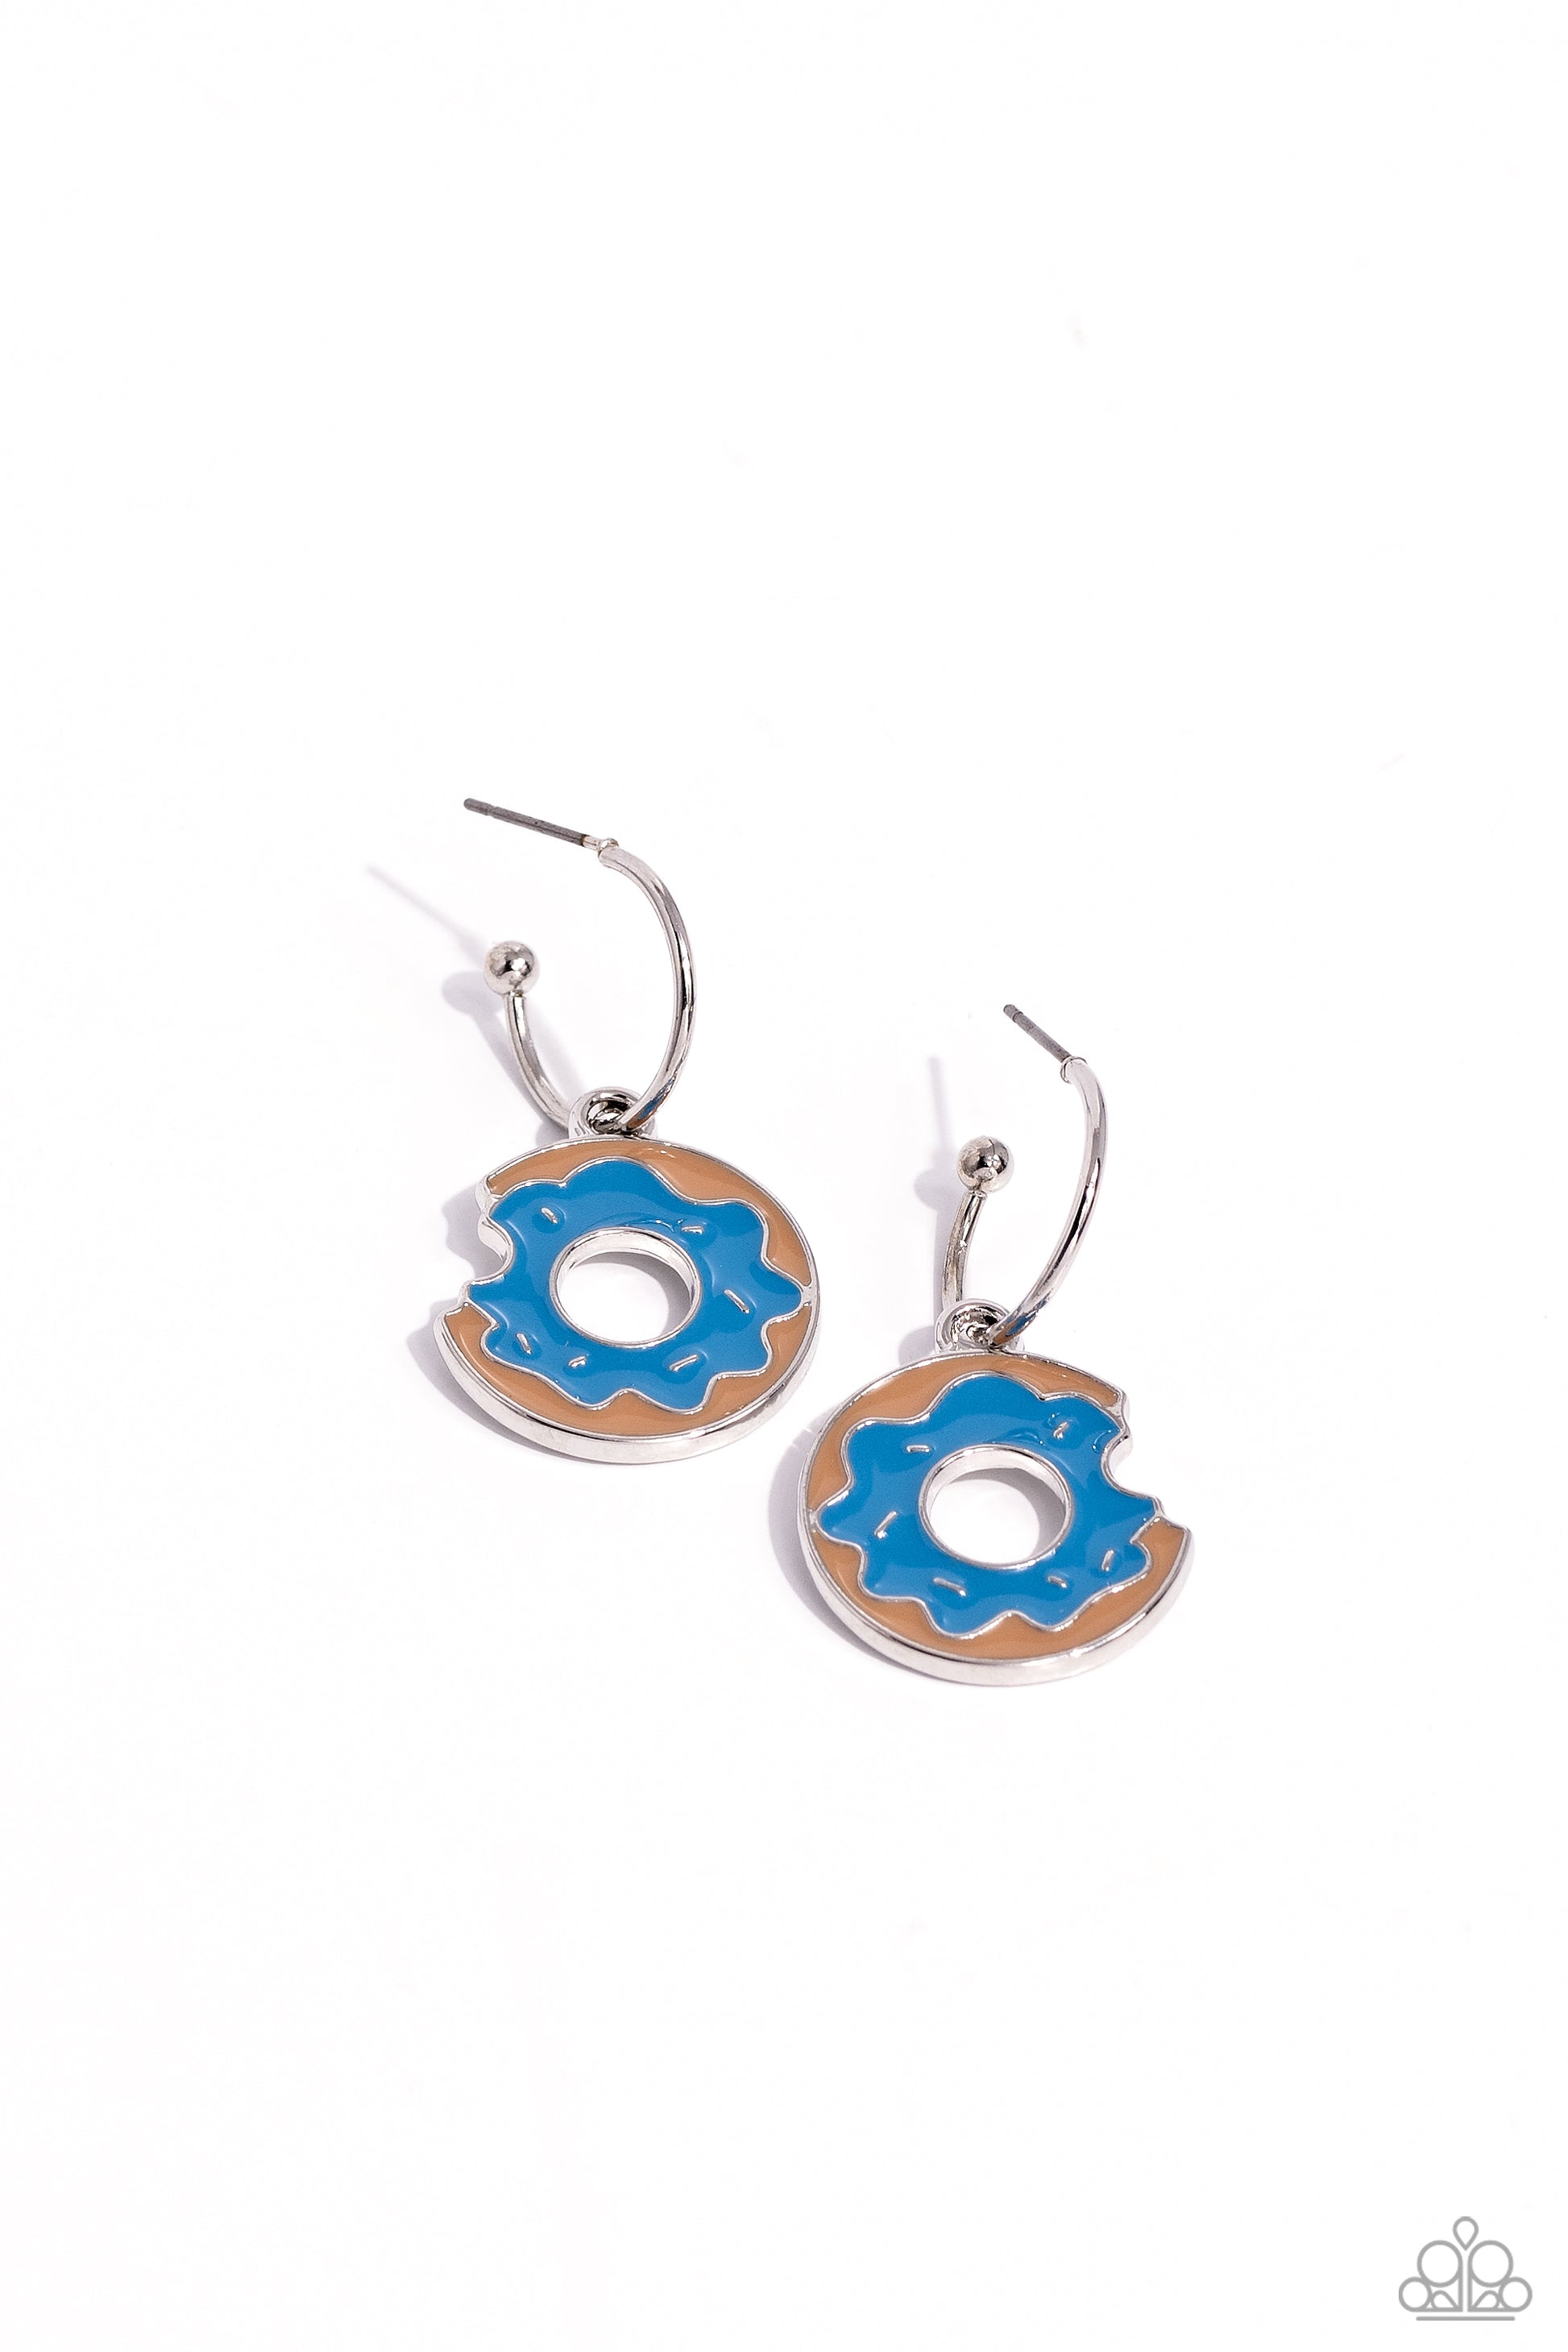 Donut Delivery Blue Hoop Earring - Paparazzi Accessories  A small, skinny, silver hoop curves around the ear in a timeless fashion with a silver ball affixed to the end of the hoop, reminiscent of a barbell fitting. A brown donut charm frosted in a blue glaze with silver sprinkles featuring a bite-mark dangles from the skinny hoop for a youthful, charming statement. Earring attaches to a standard post fitting. Hoop measures approximately 1/2" in diameter.  Sold as one pair of hoop earrings.  P5HO-BLXX-059XX